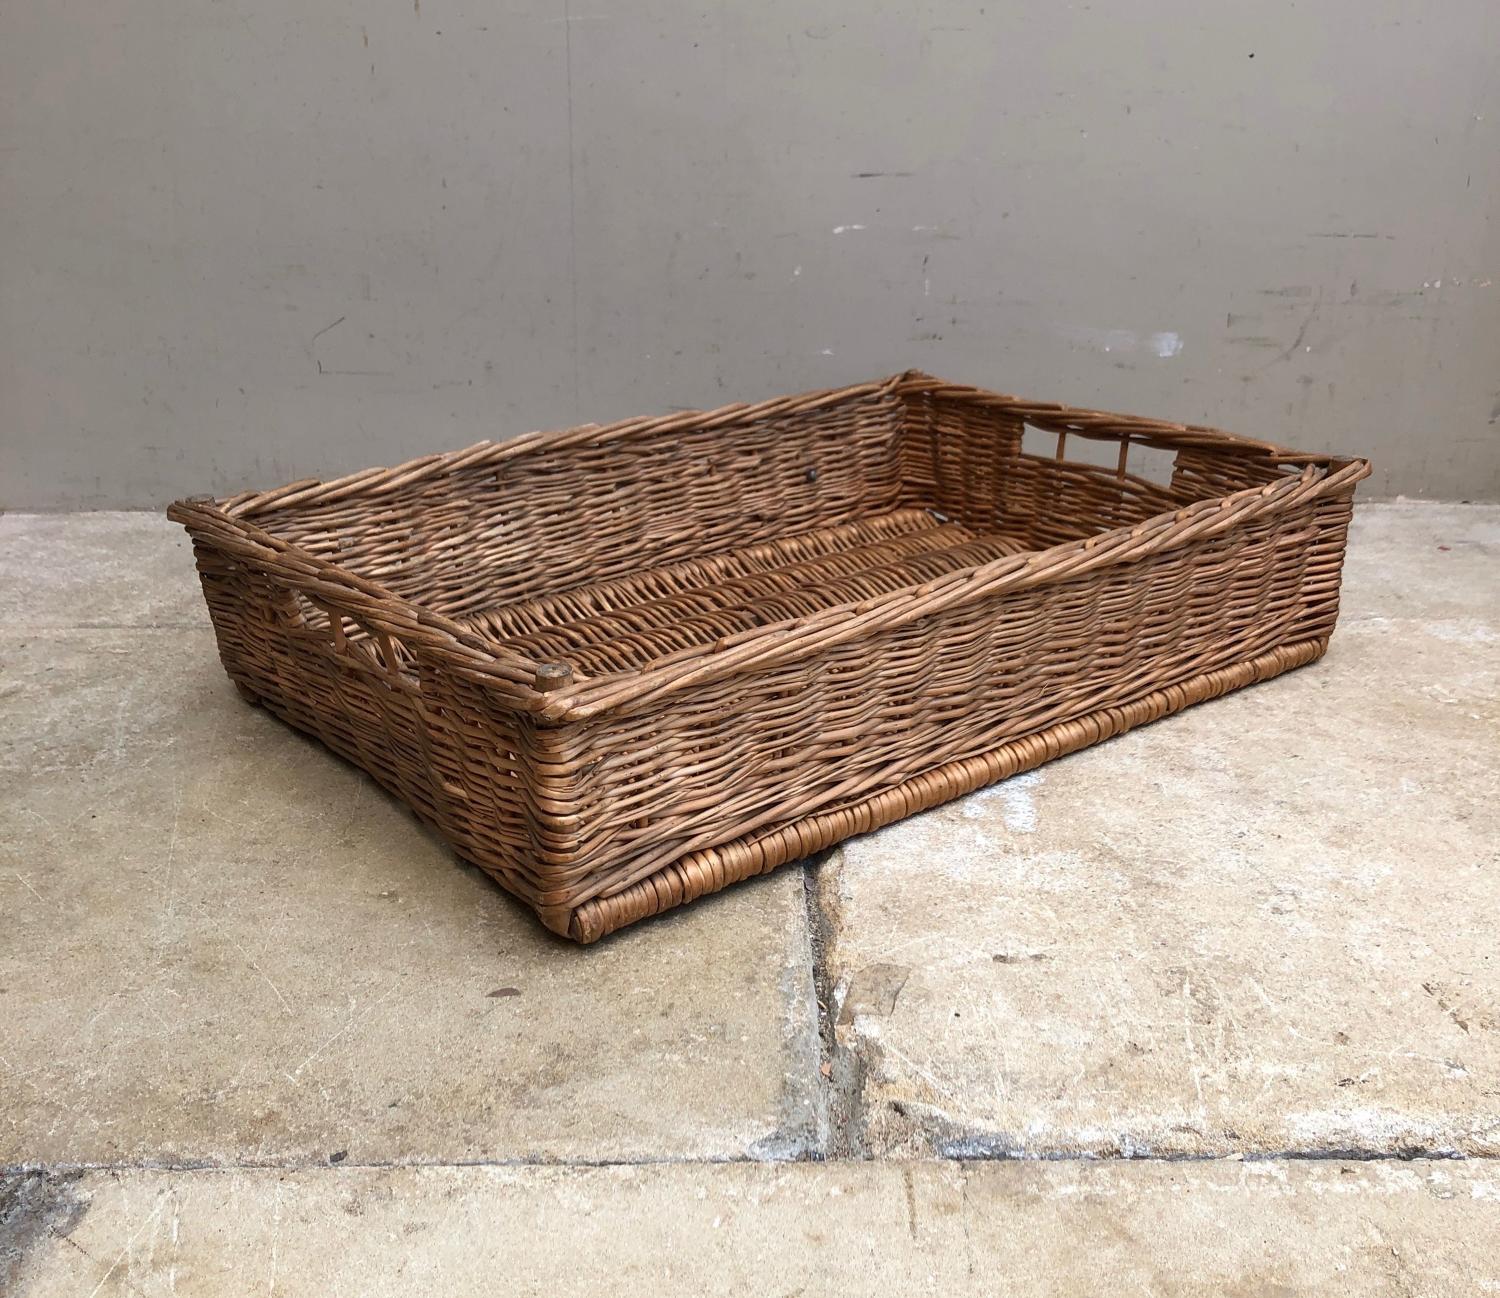 Antique Bakers Basket with Side Carrying Handles in Lovely Condition.